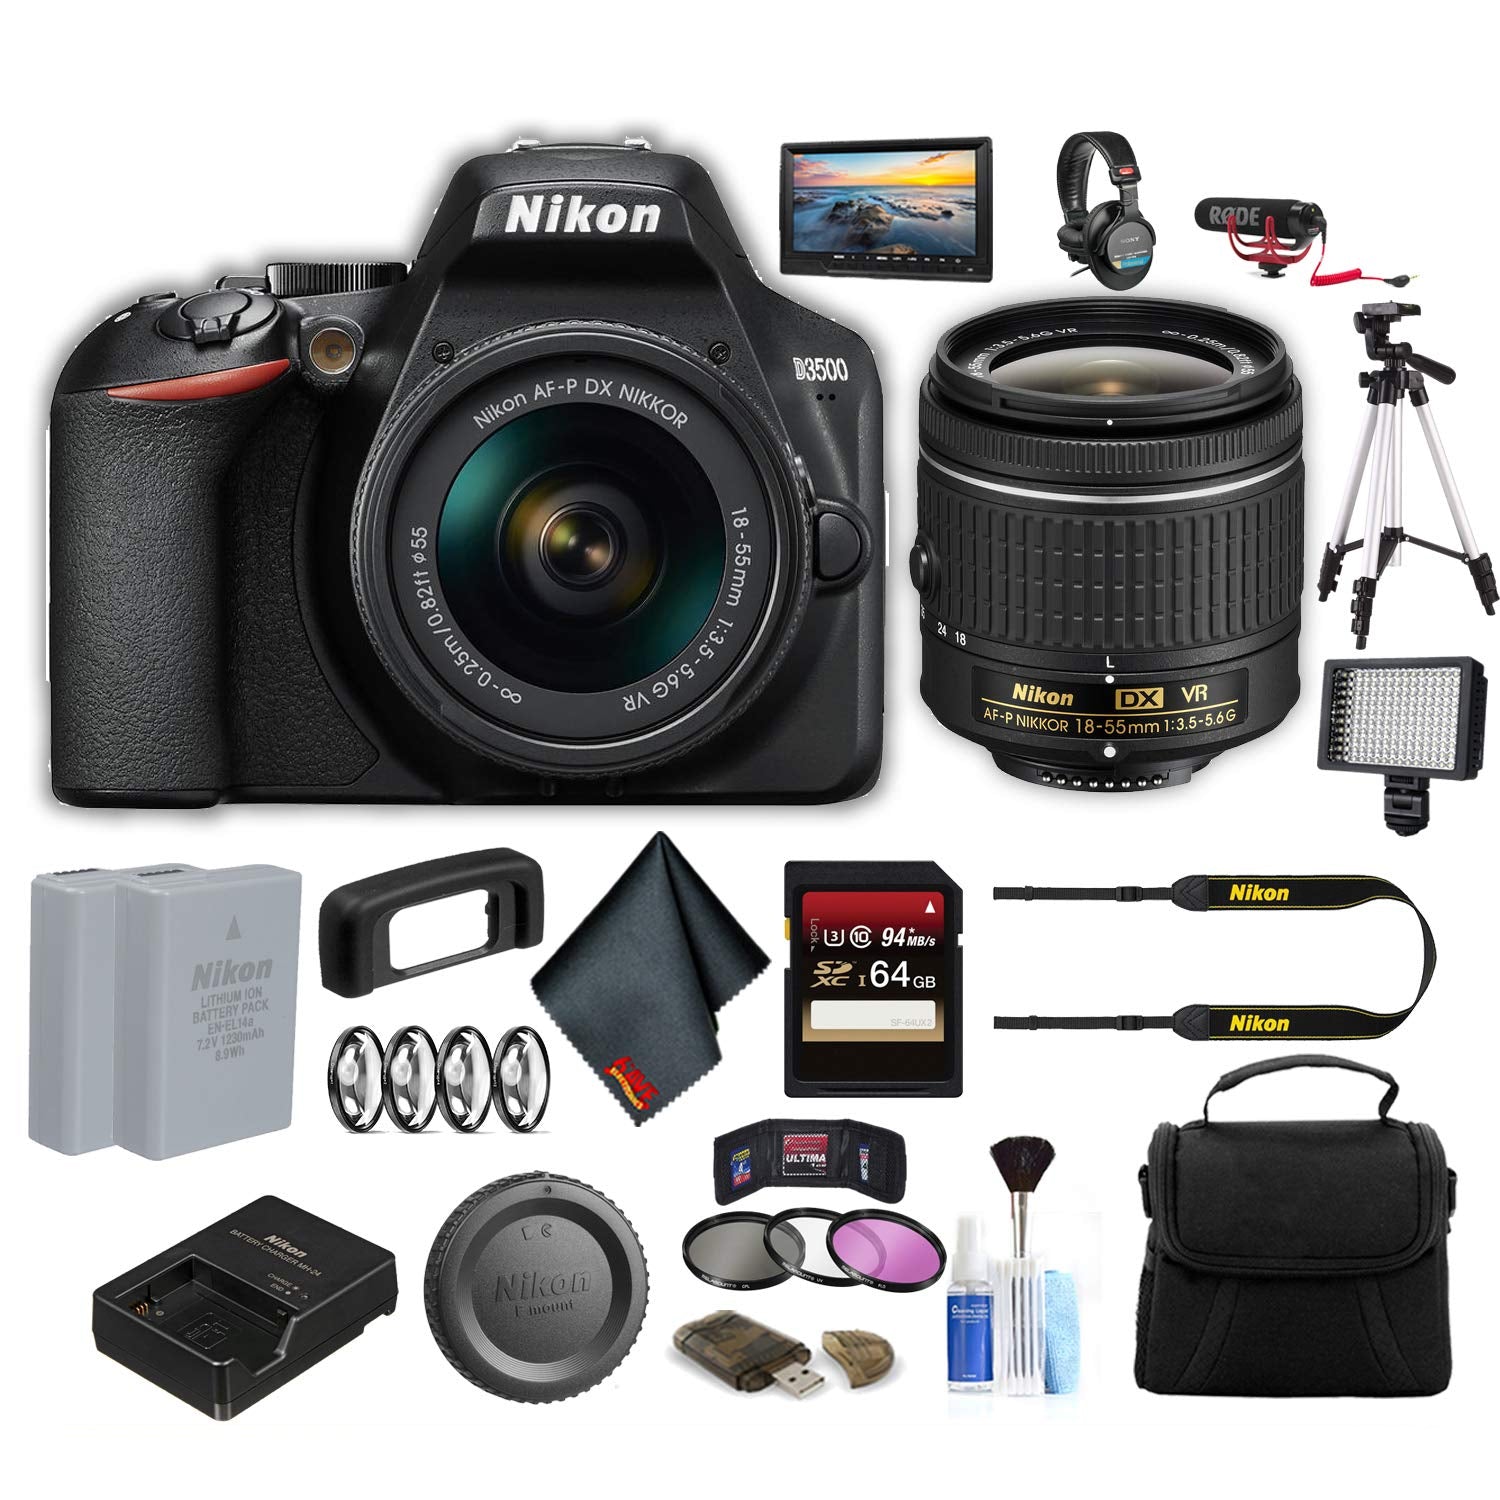 Nikon D3500 DSLR Camera with 18-55mm Lens (1590) Professional Bundle W/Bag, Extra Battery, LED Light, Mic, Filters, Tripod, Monitor and More